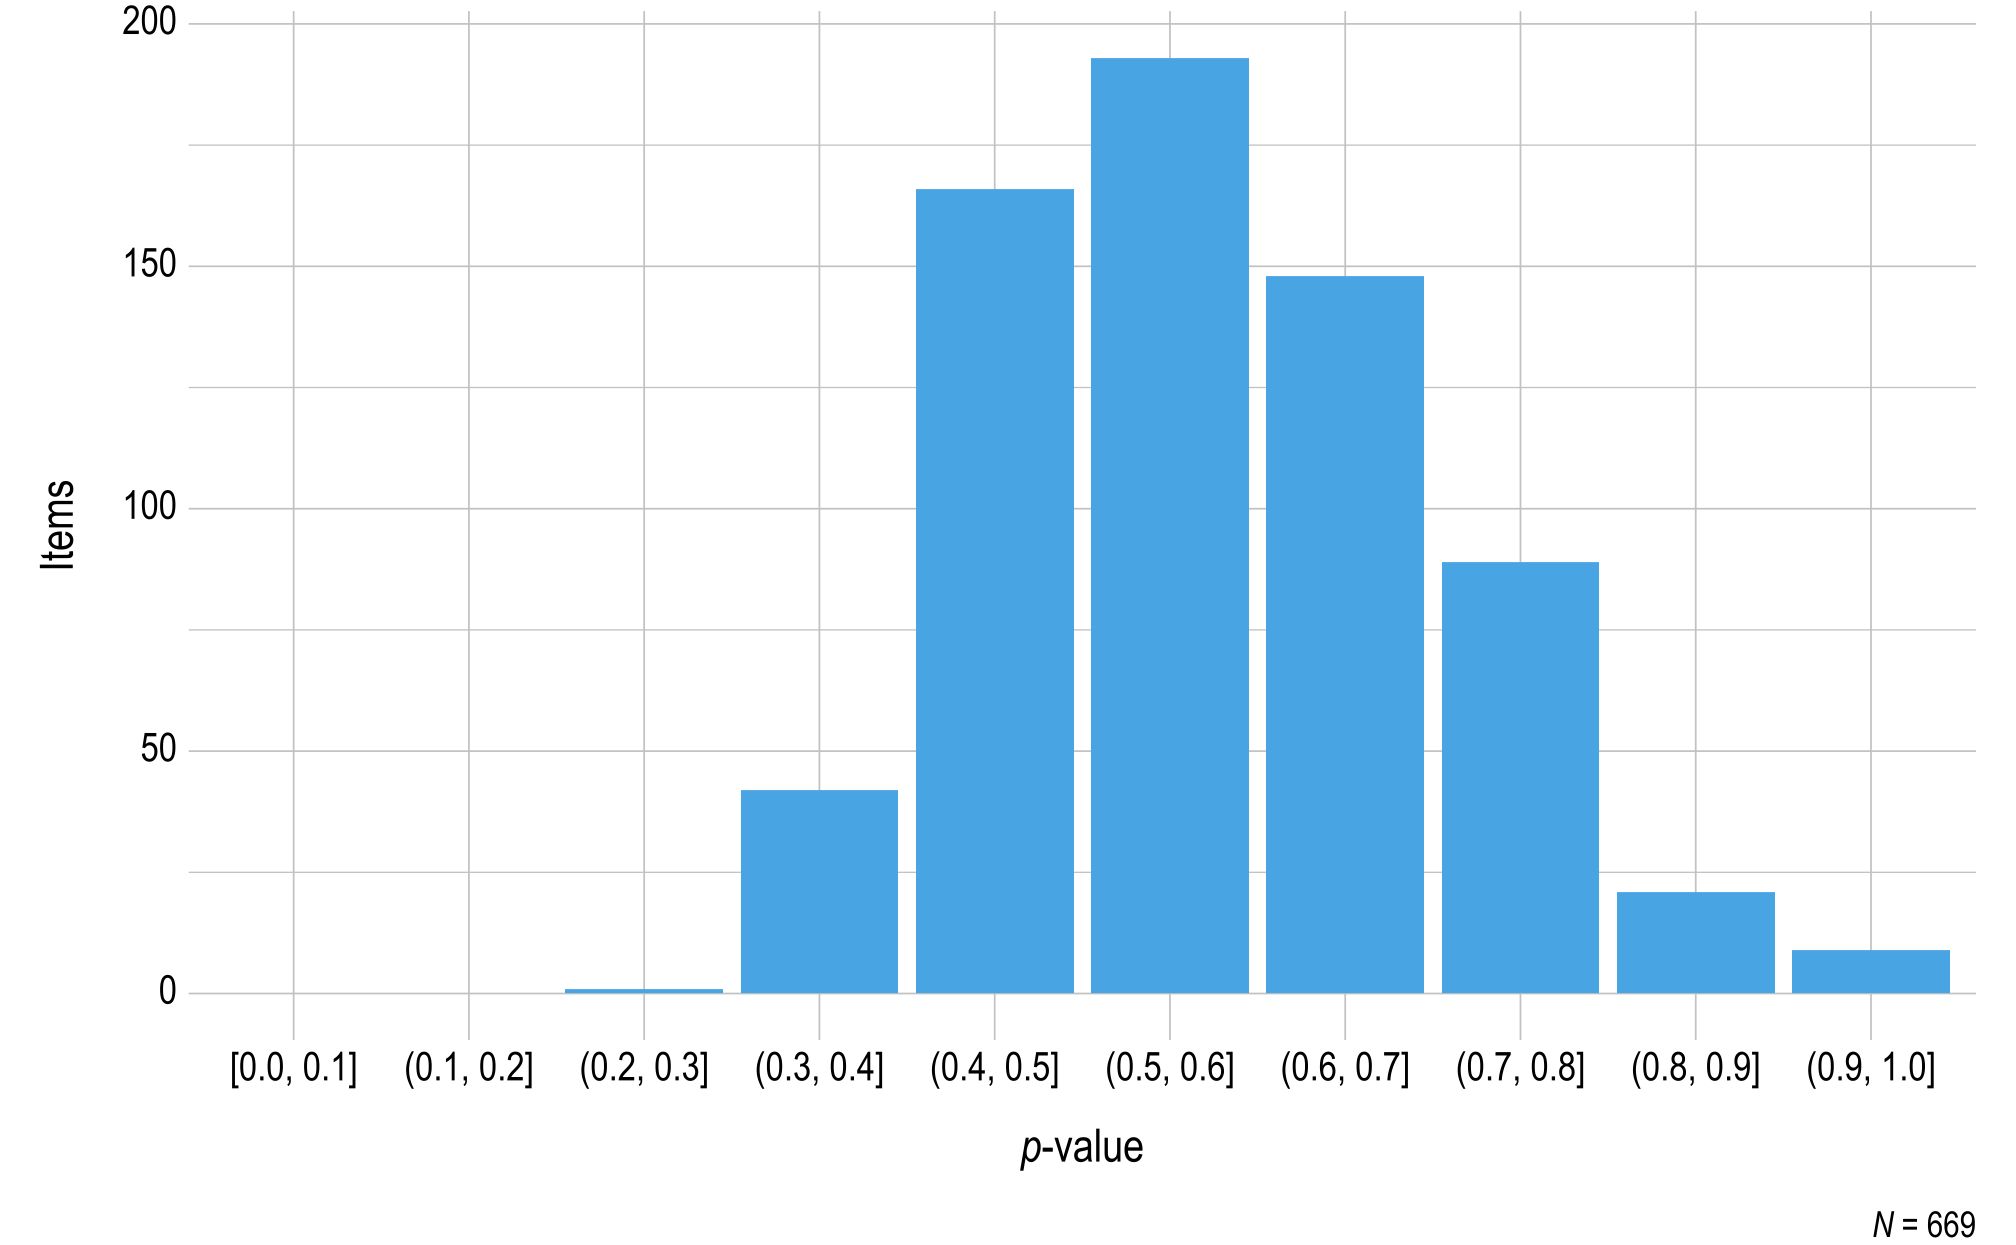 A histogram displaying p-value on the x-axis and the number of science operational items on the y-axis.